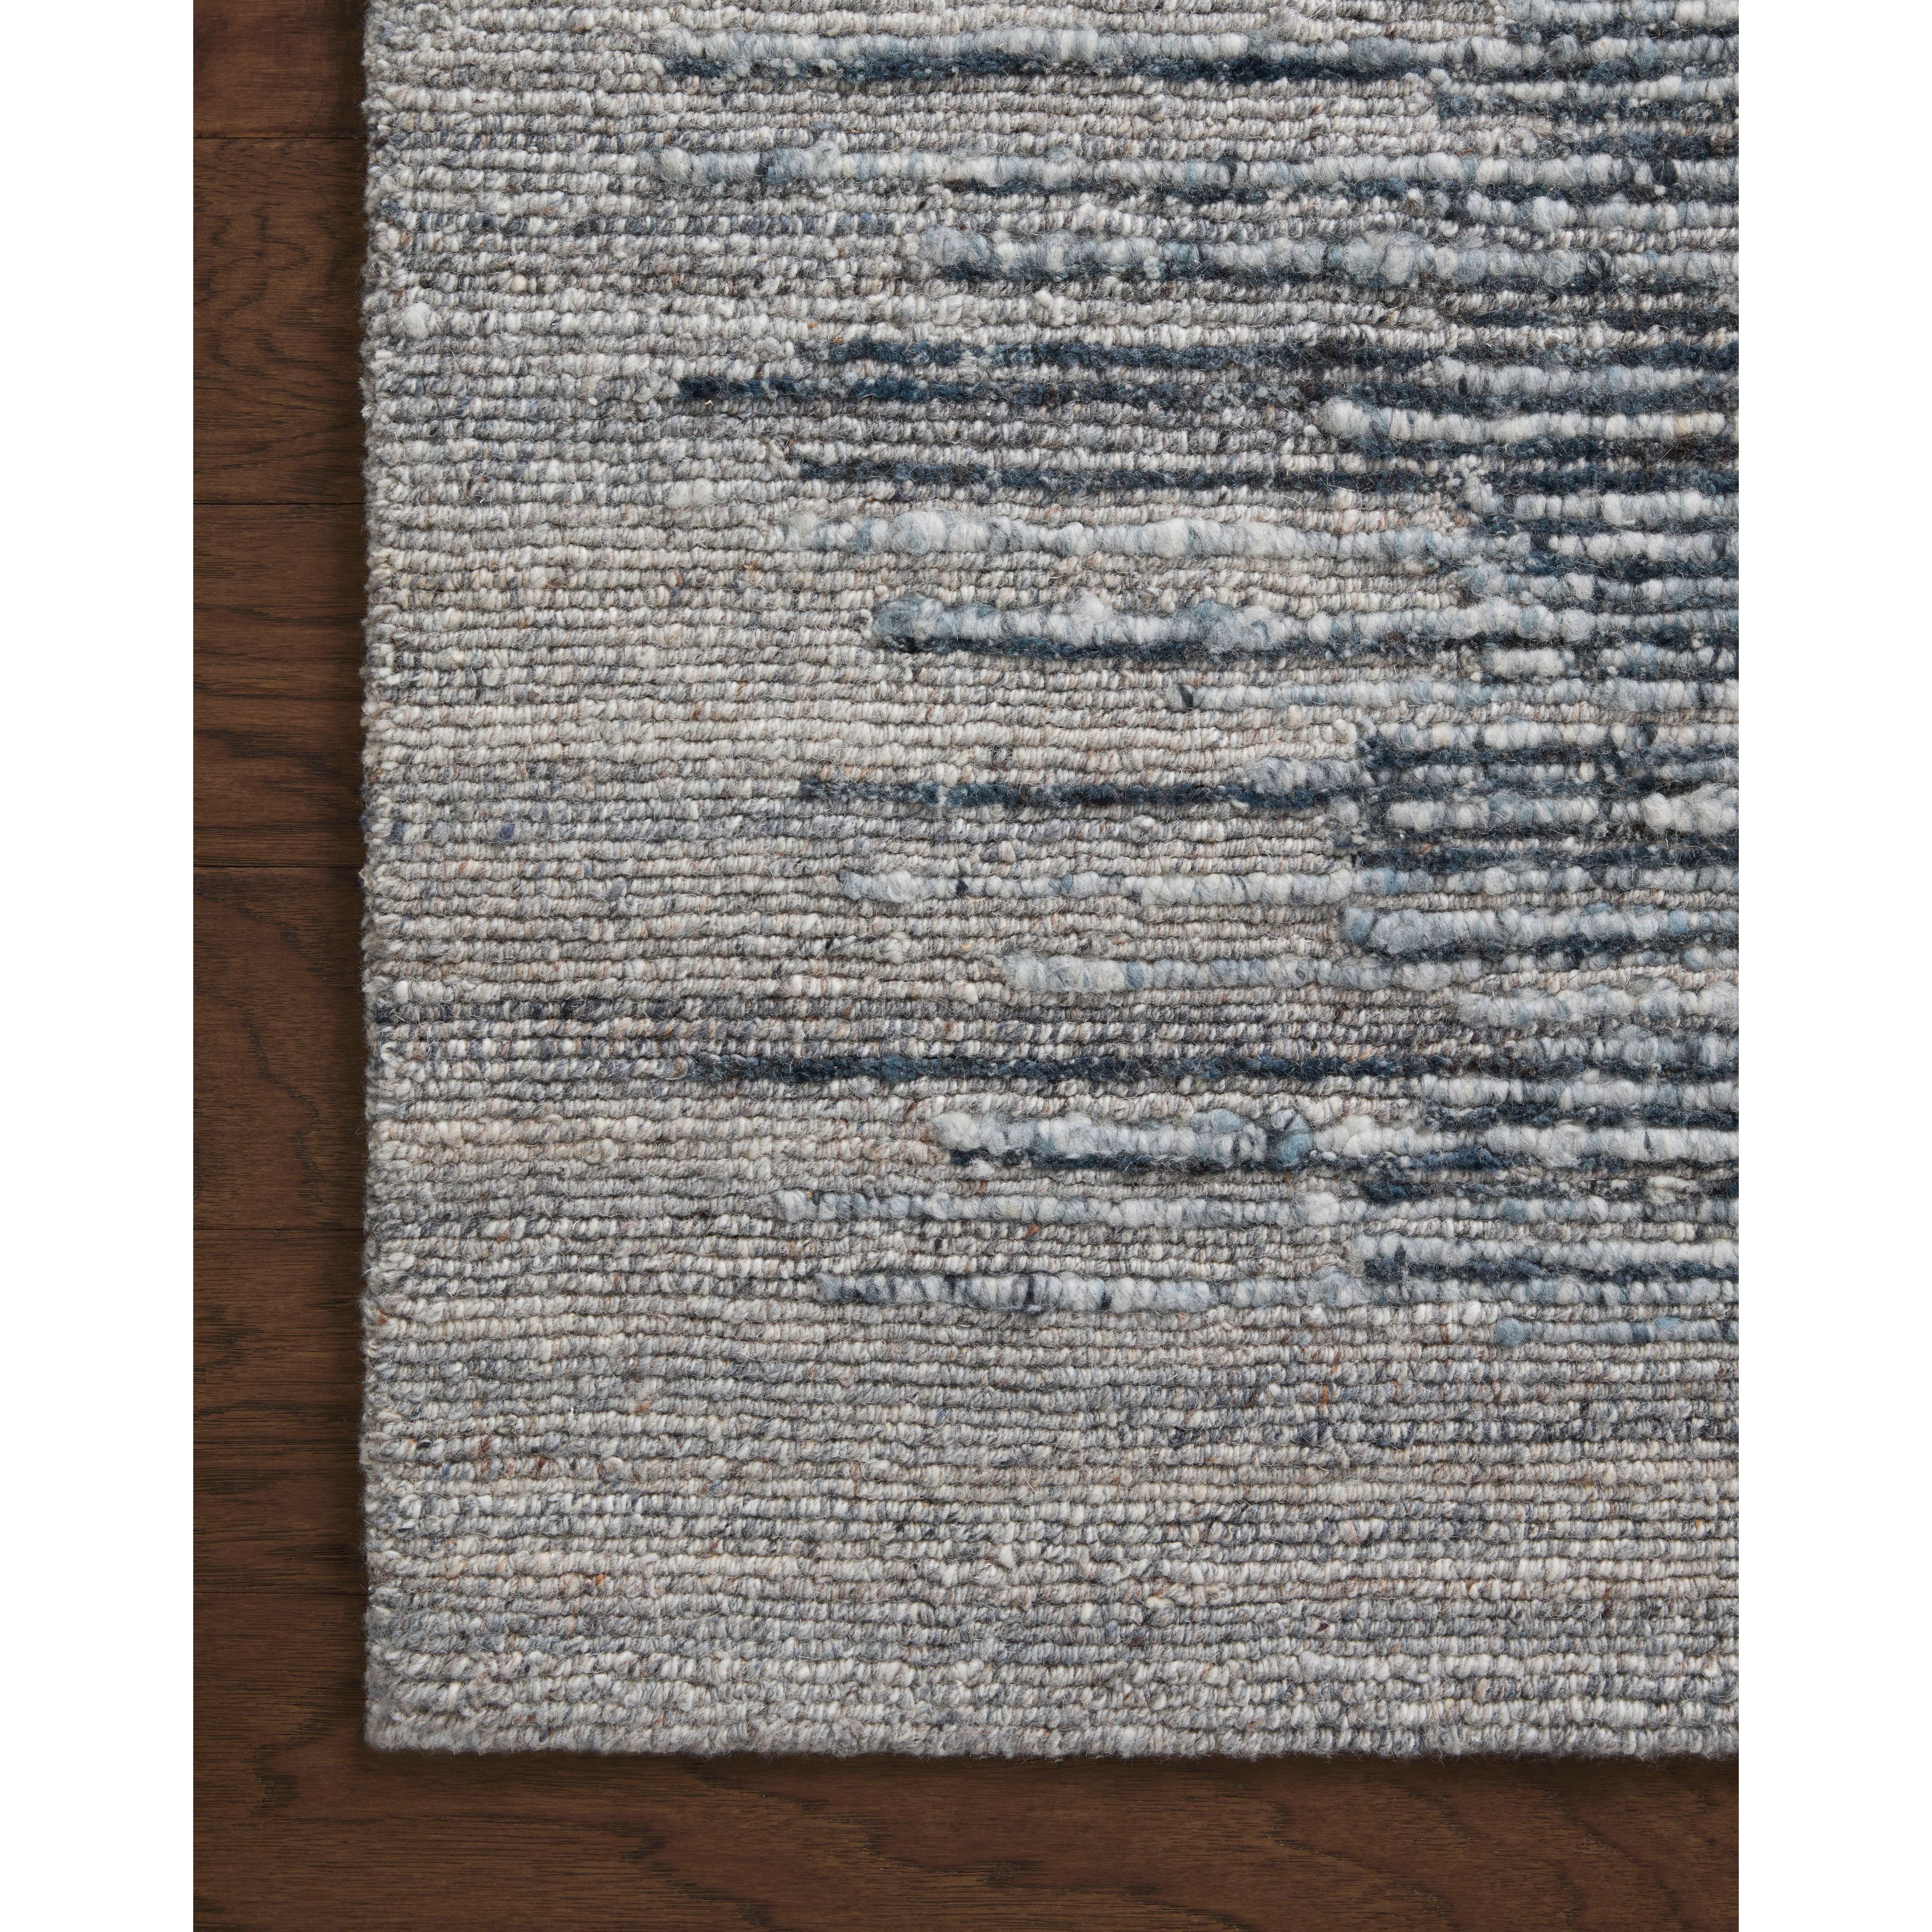 The Raquel Collection exemplifies what makes a hand-knotted rug so unique. Each area rug has a ribbed texture and subtle striping created by the artisan’s cut-and-loop technique. Raquel features an organic, asymmetrical linear pattern in an airy, neutral palette. Amethyst Home provides interior design, new home construction design consulting, vintage area rugs, and lighting in the Alpharetta metro area.